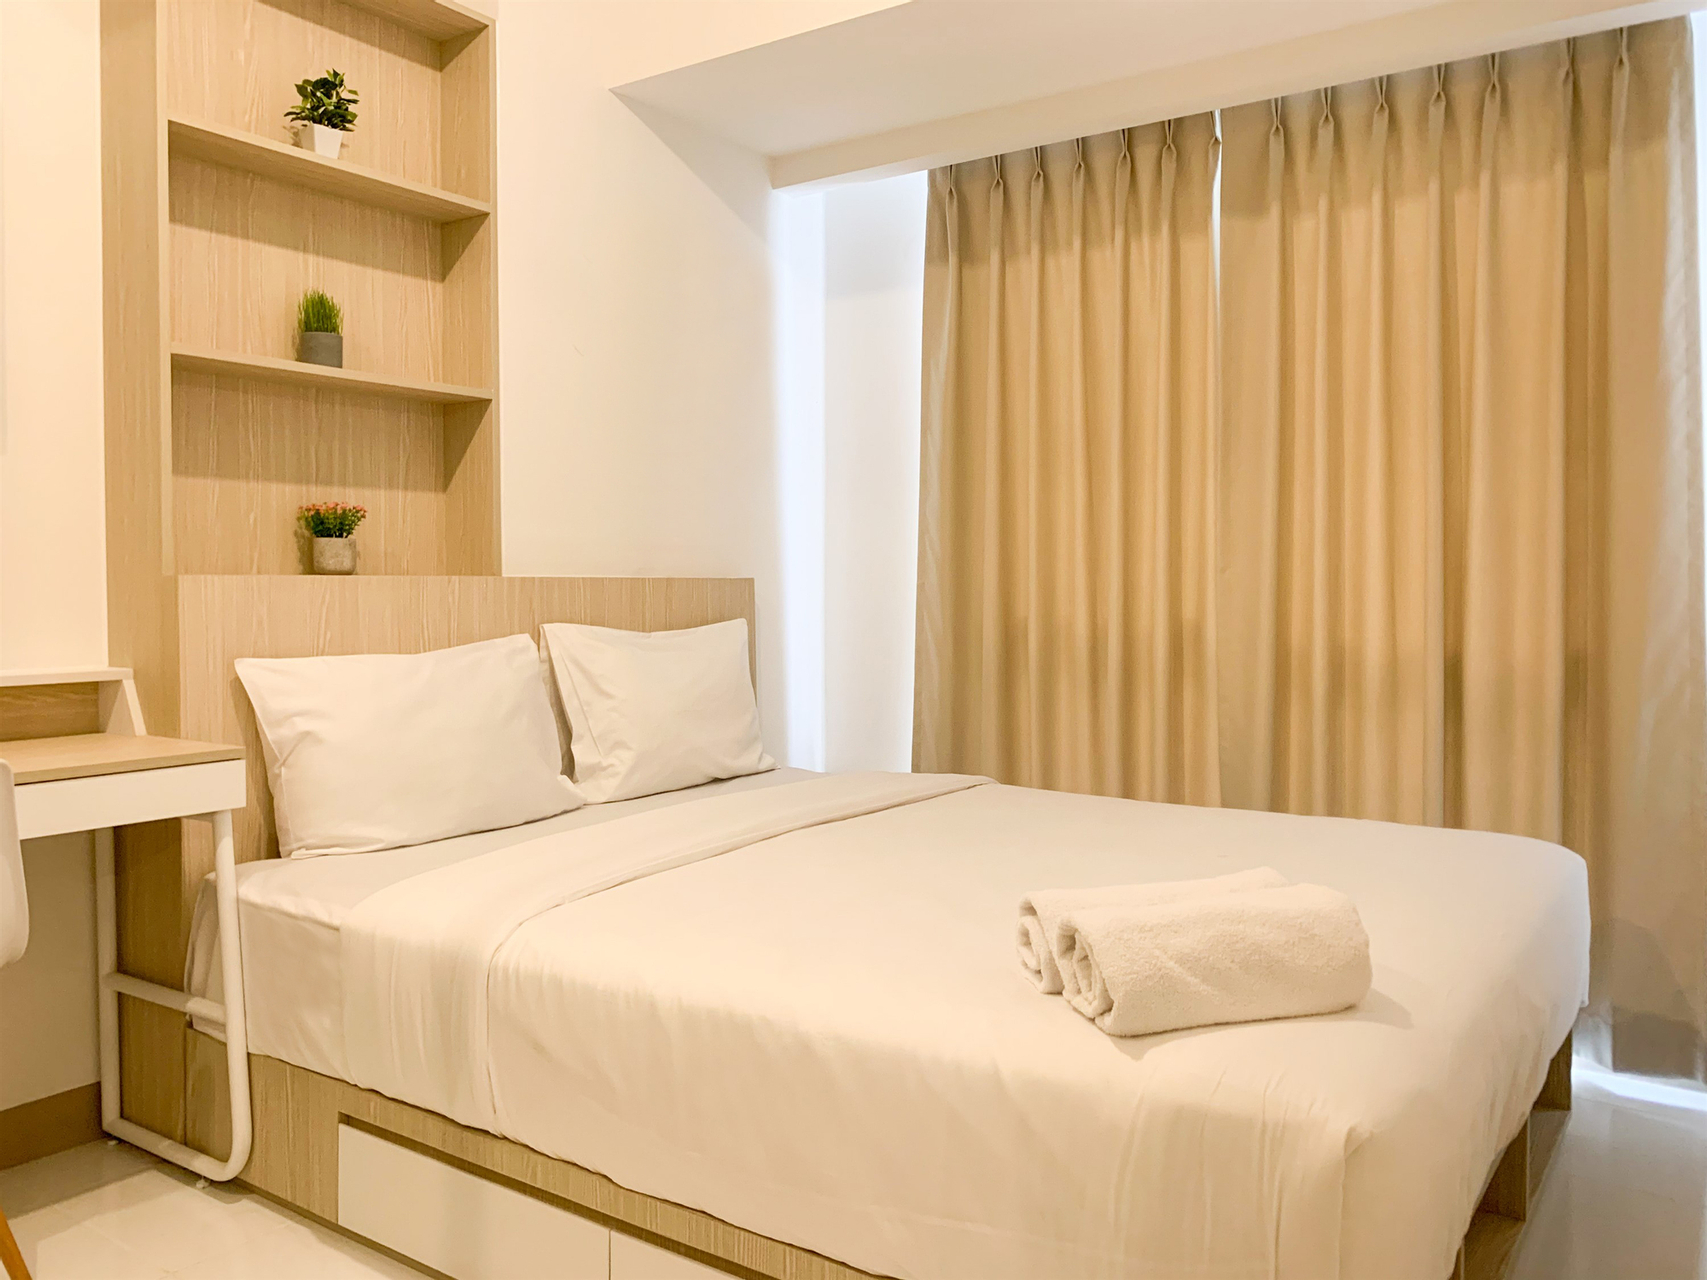 Simply and Comfortable 2BR Apartment Tokyo Riverside PIK 2 By Travelio, Tangerang